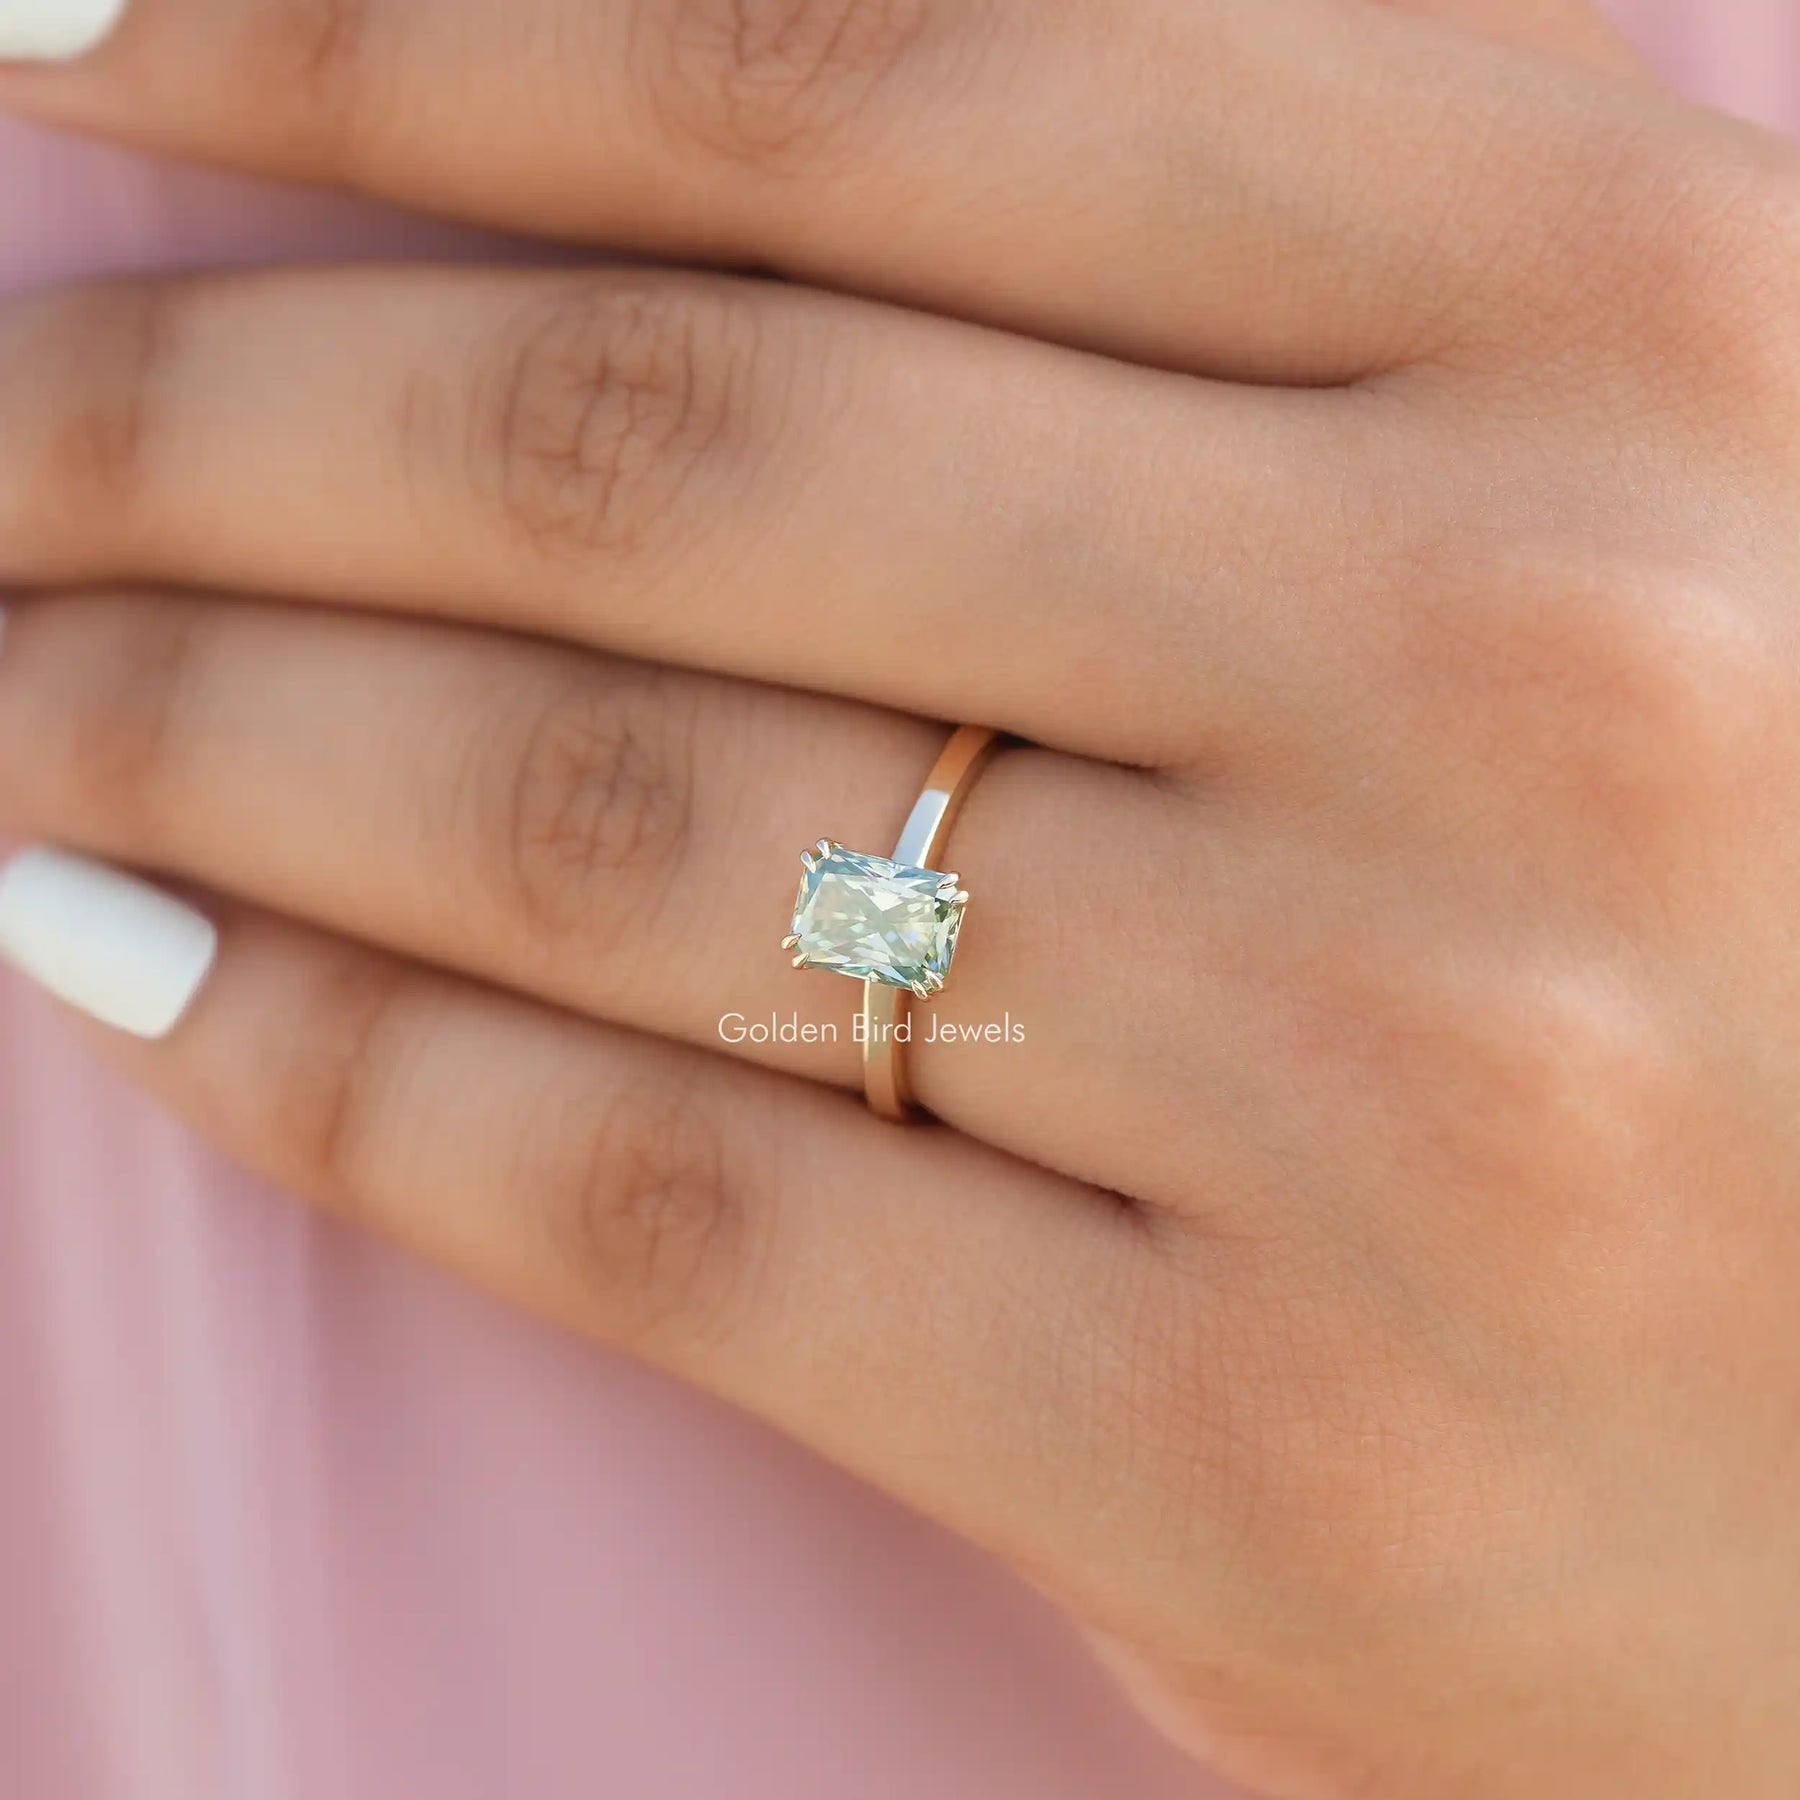 [Fancy Colored Radiant Cut Moissanite Engagement Ring]-[Golden Bird Jewels]